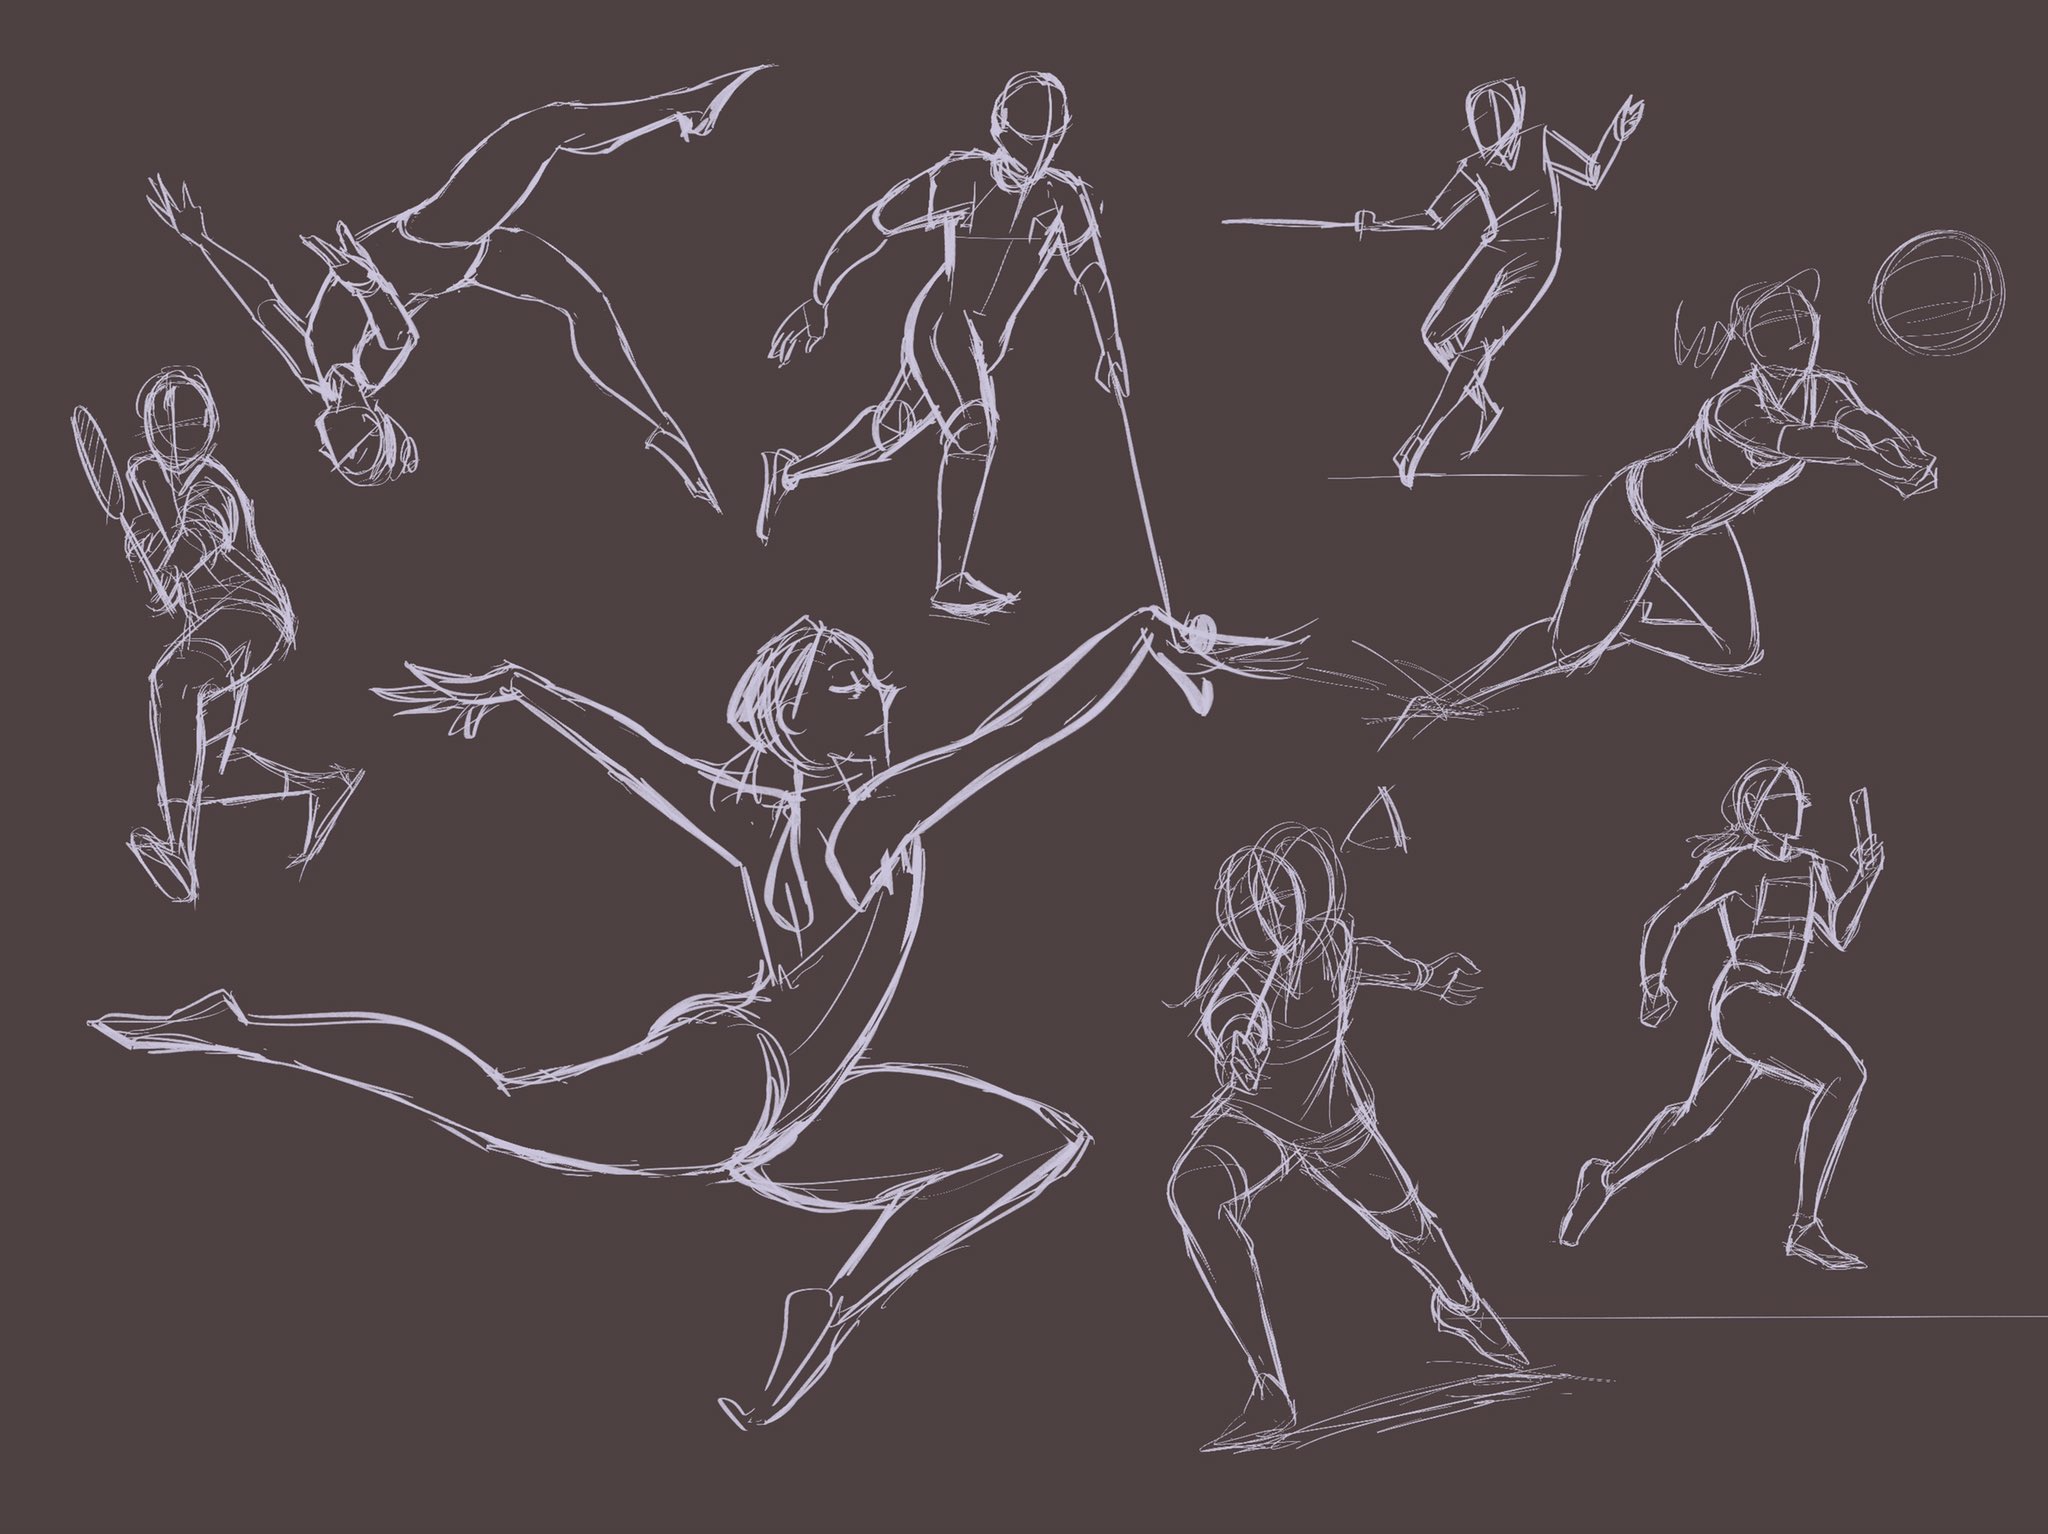 Various sketches of athletes in motion.